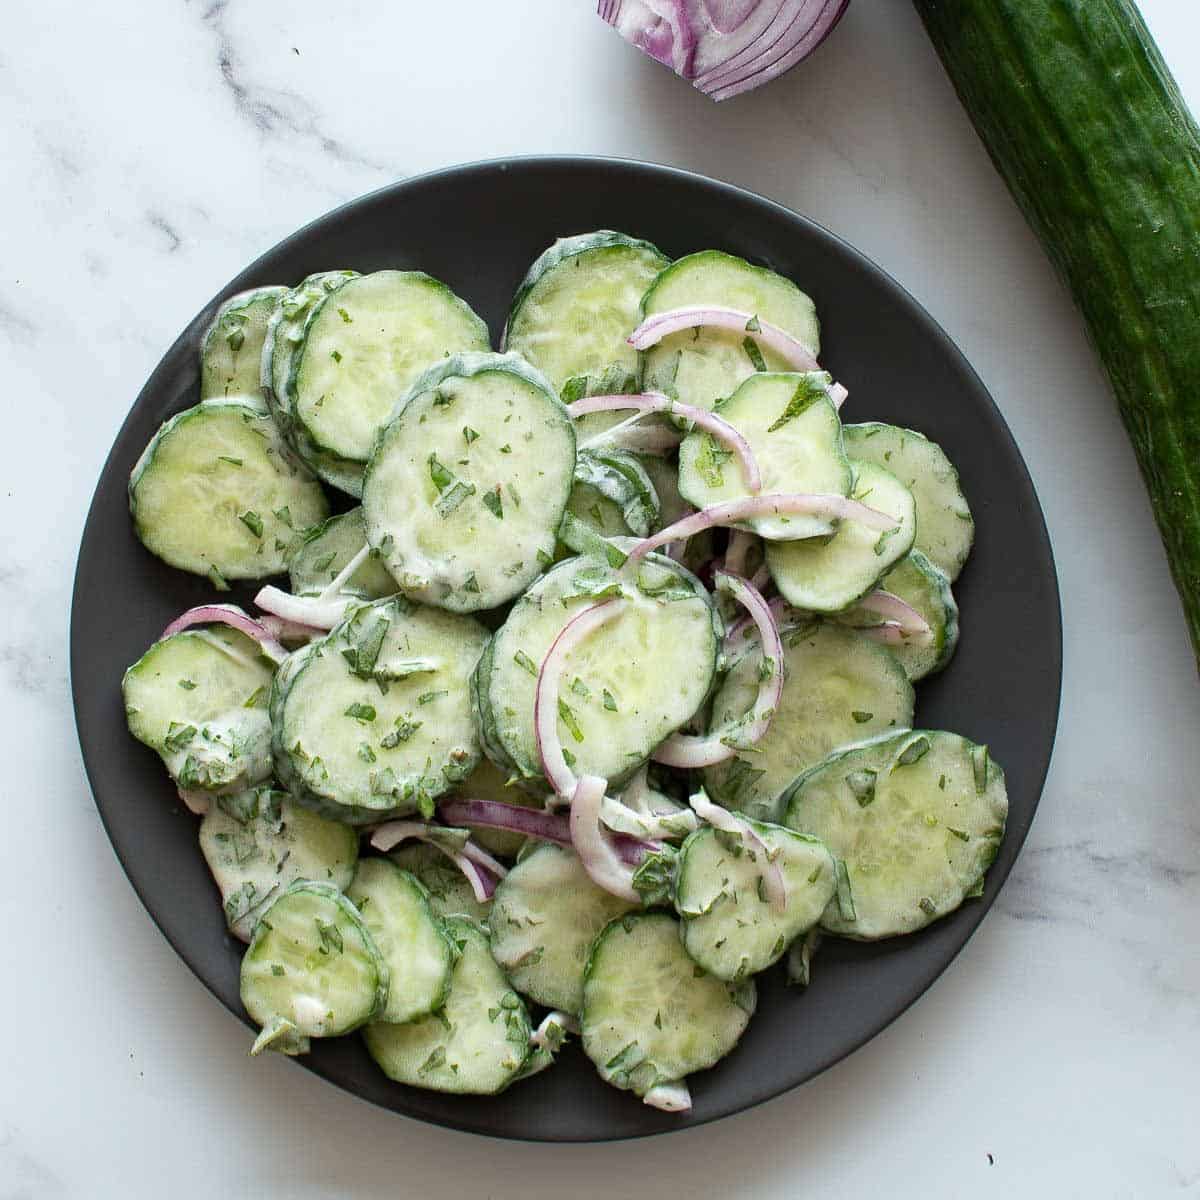 Cucumber salad with onion on a plate.